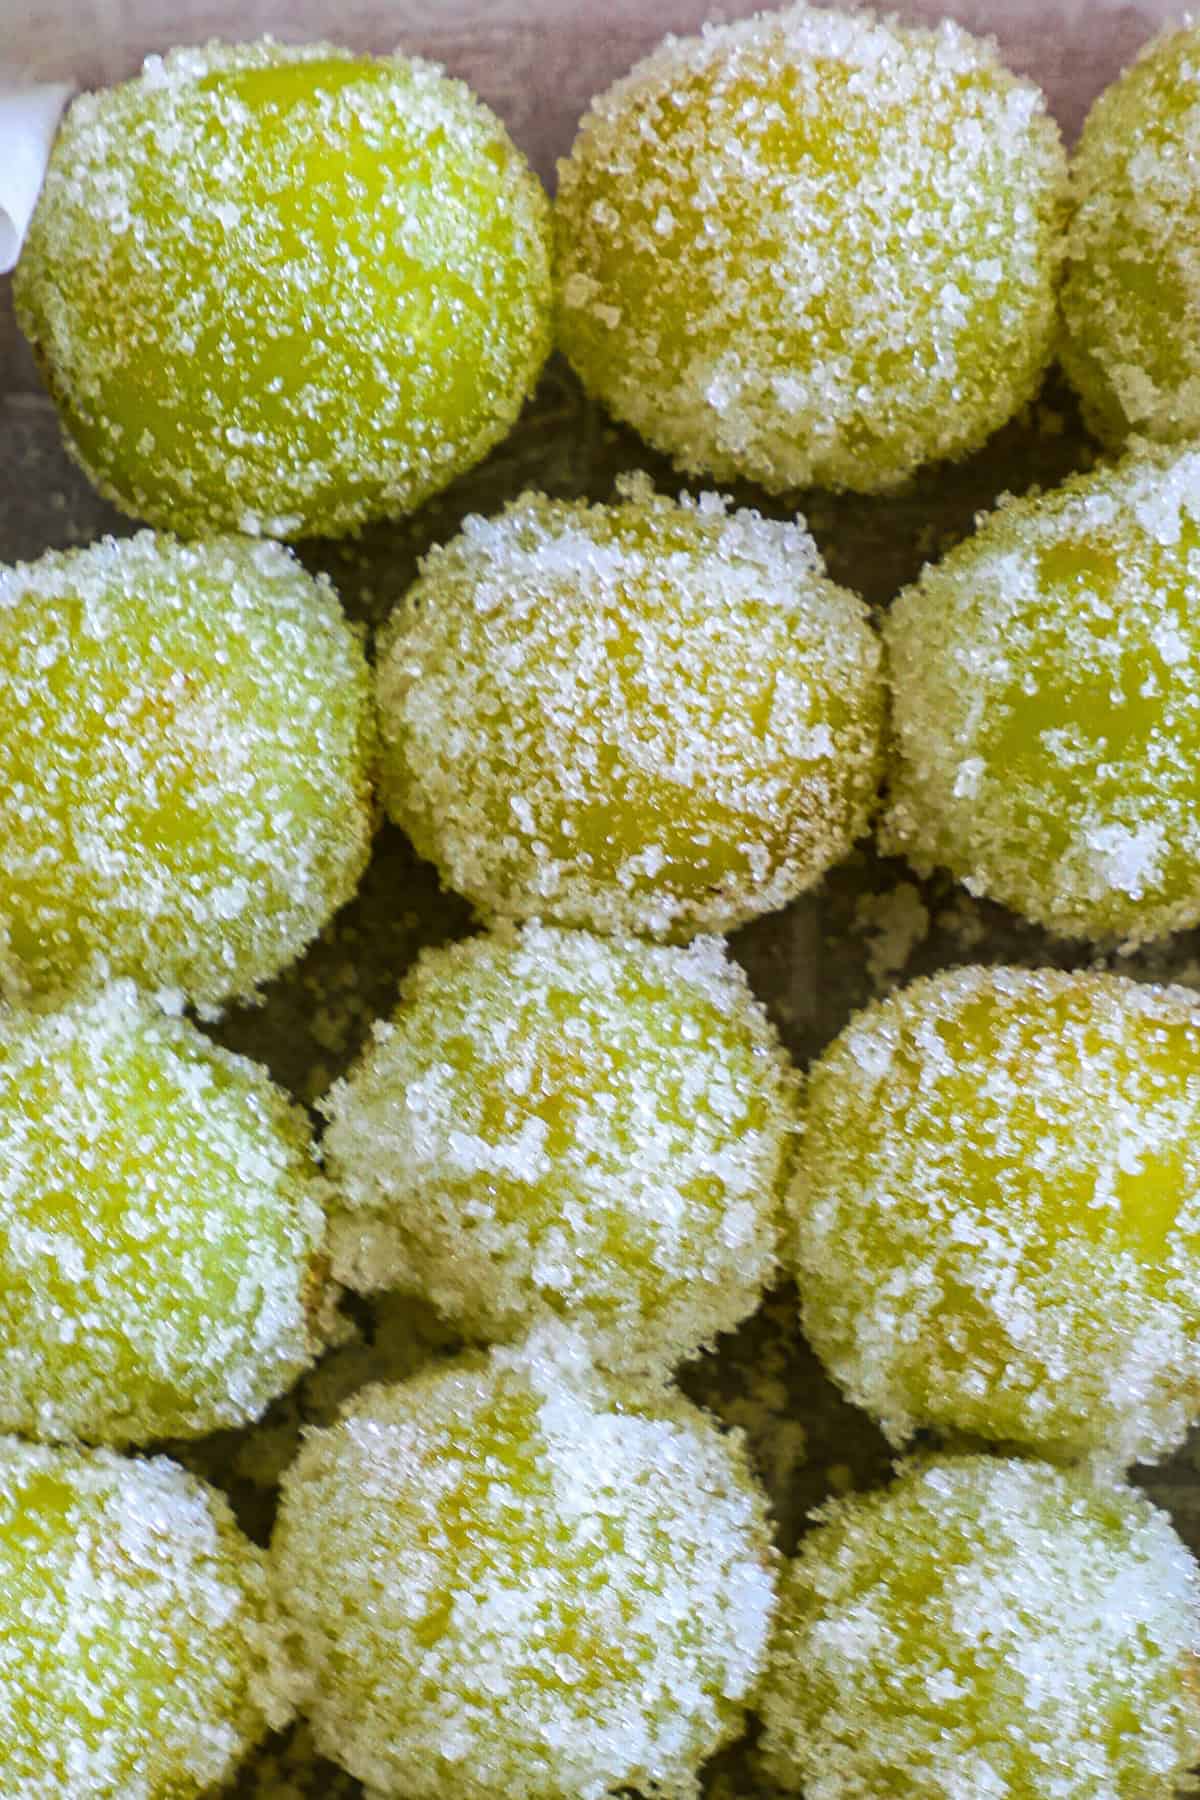 Close-up of sugared green candies piled together, with focus on their textured sugar coating.